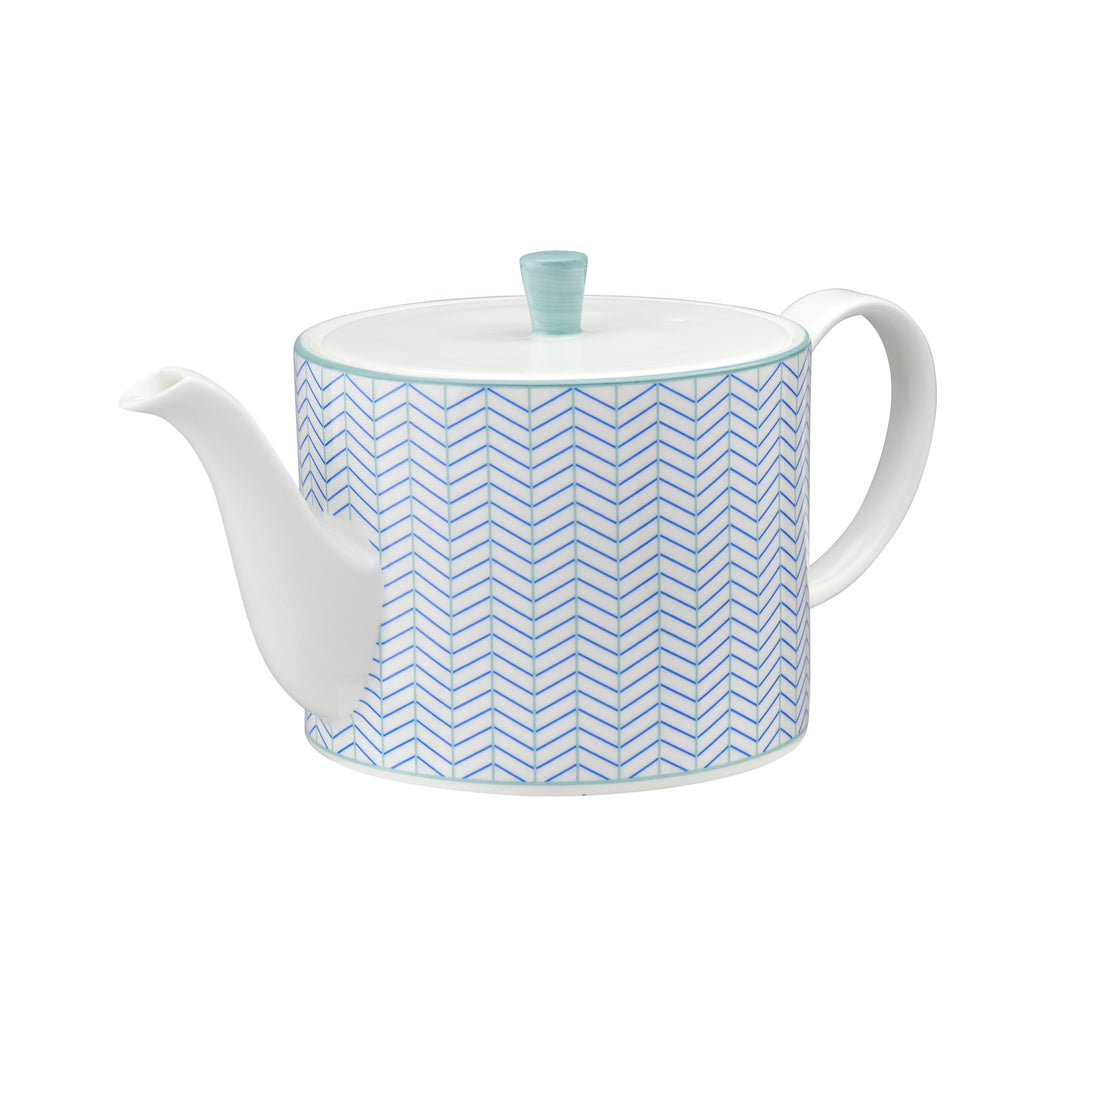 Ebb Teapot in Blue & Turquoise - 1L